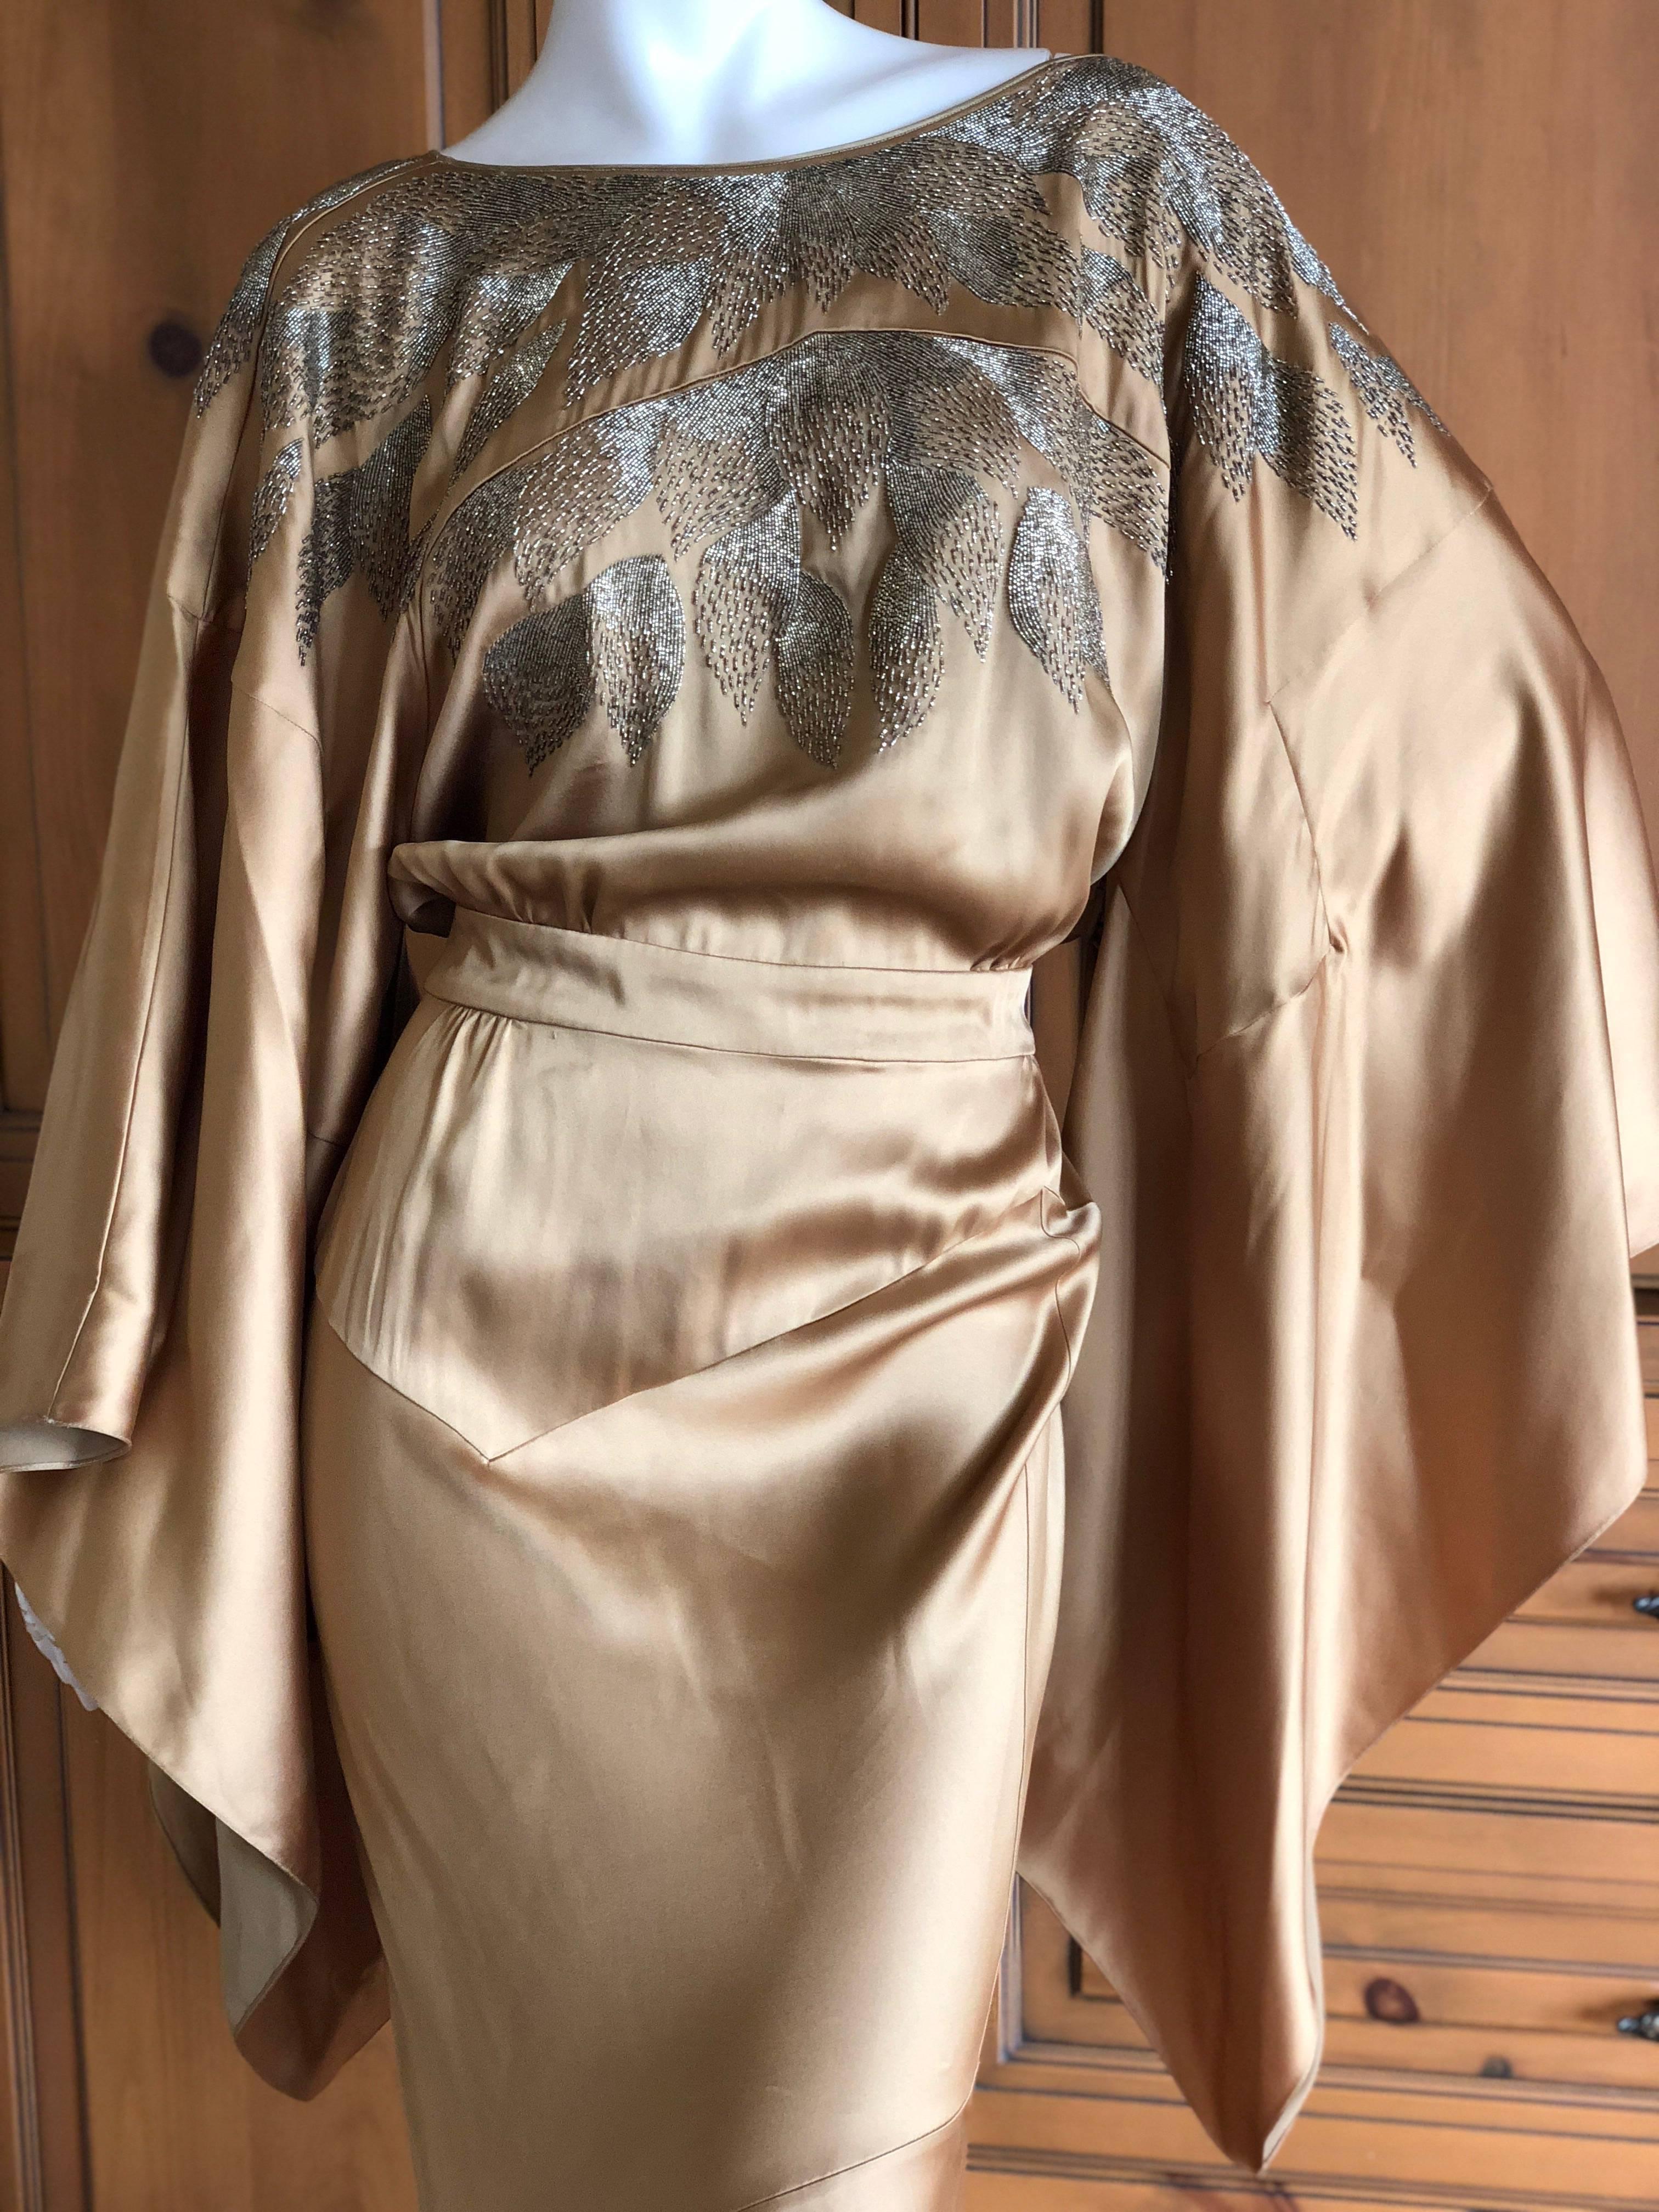 JJohn Galliano Dramatic Gold Kimono Sleeve Extravagantly Beaded Evening Dress 
This is so beautiful, please see all the photos.
Dramatic kimono sleeves and a low vee in the back, just stunning.
 Size46
Bust 44